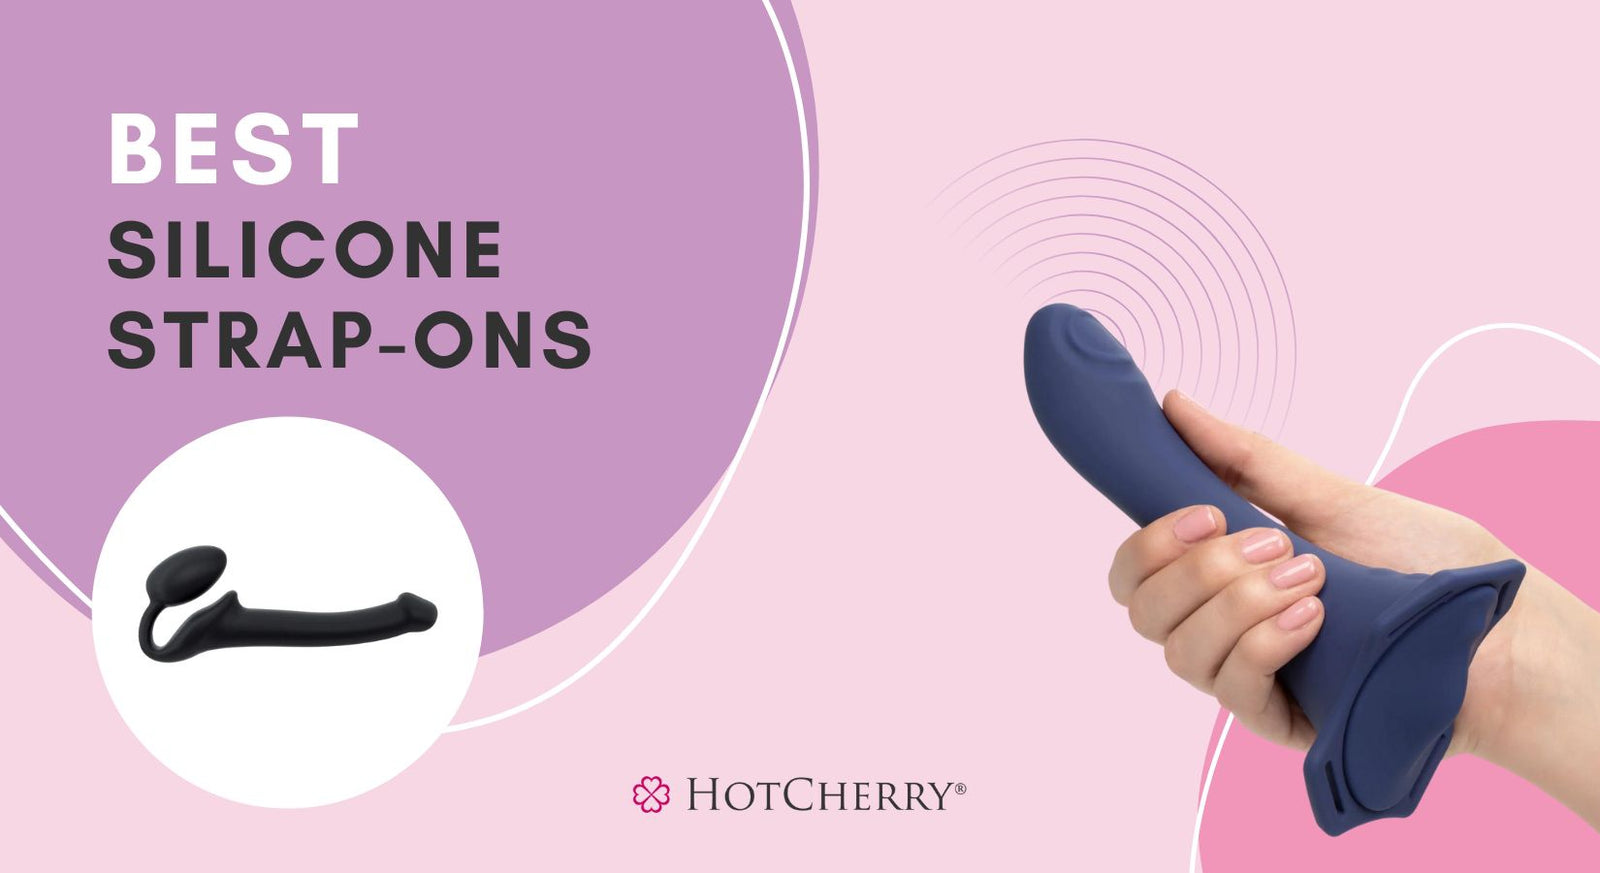 10 Best Silicone Strap-Ons for Smooth & Body-Safe Pleasure